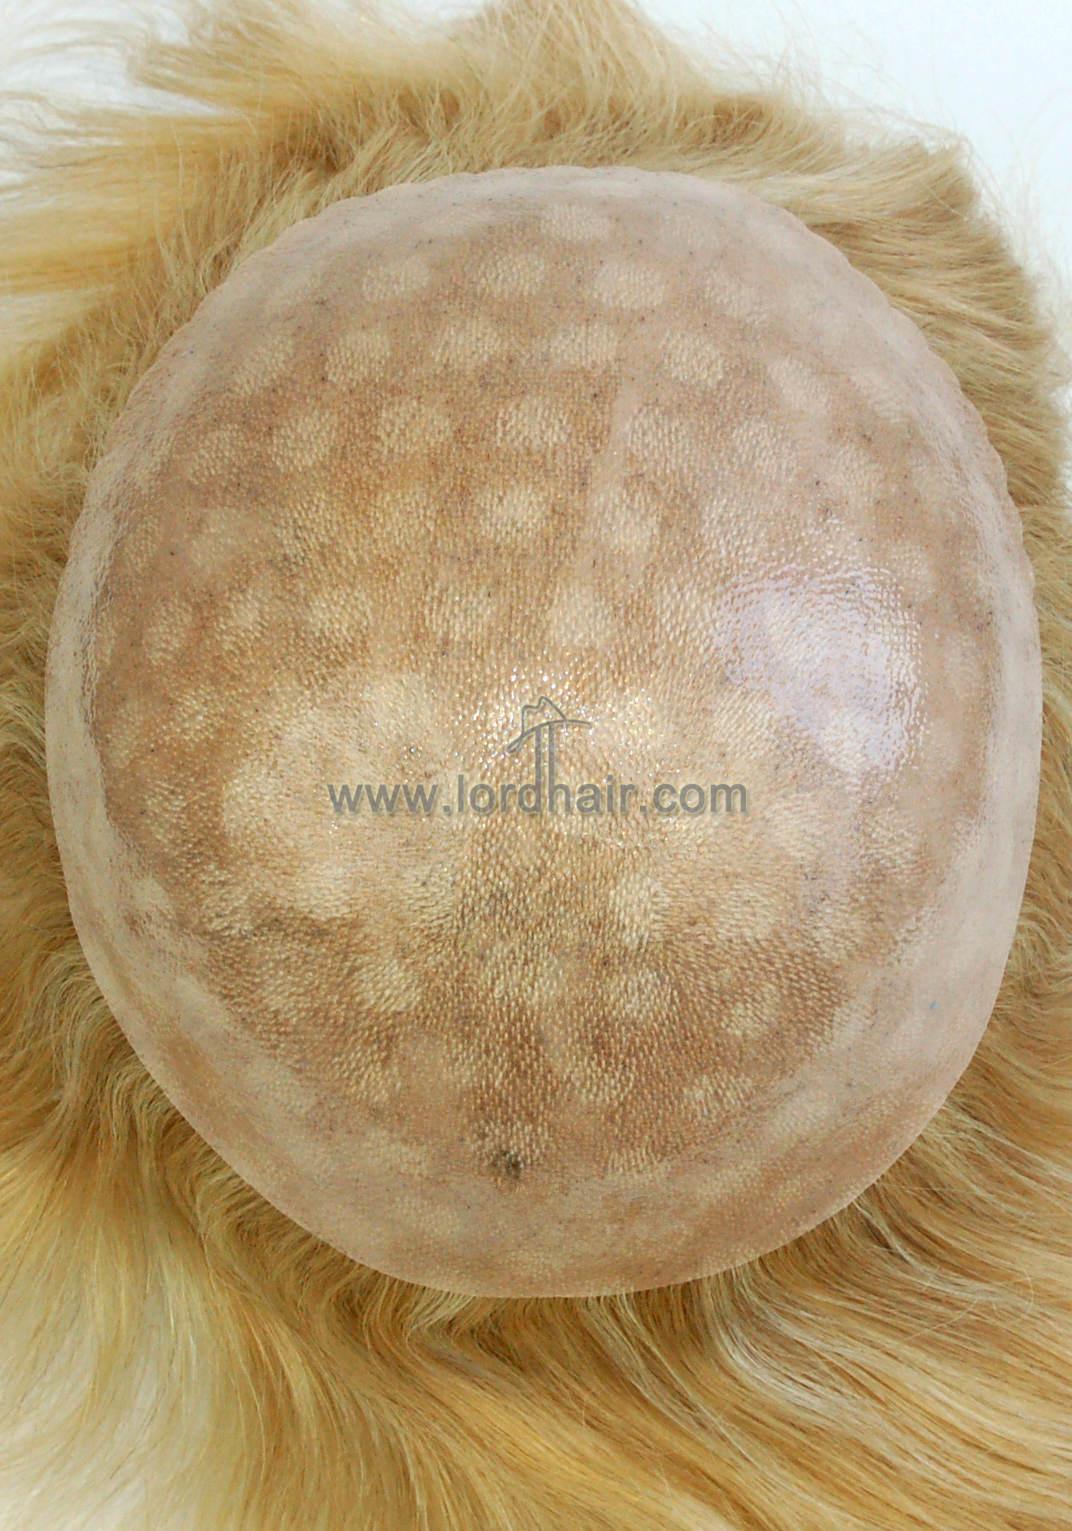 YJ643: Natural Looking Thin Skin Indian Human Hair Replacement System